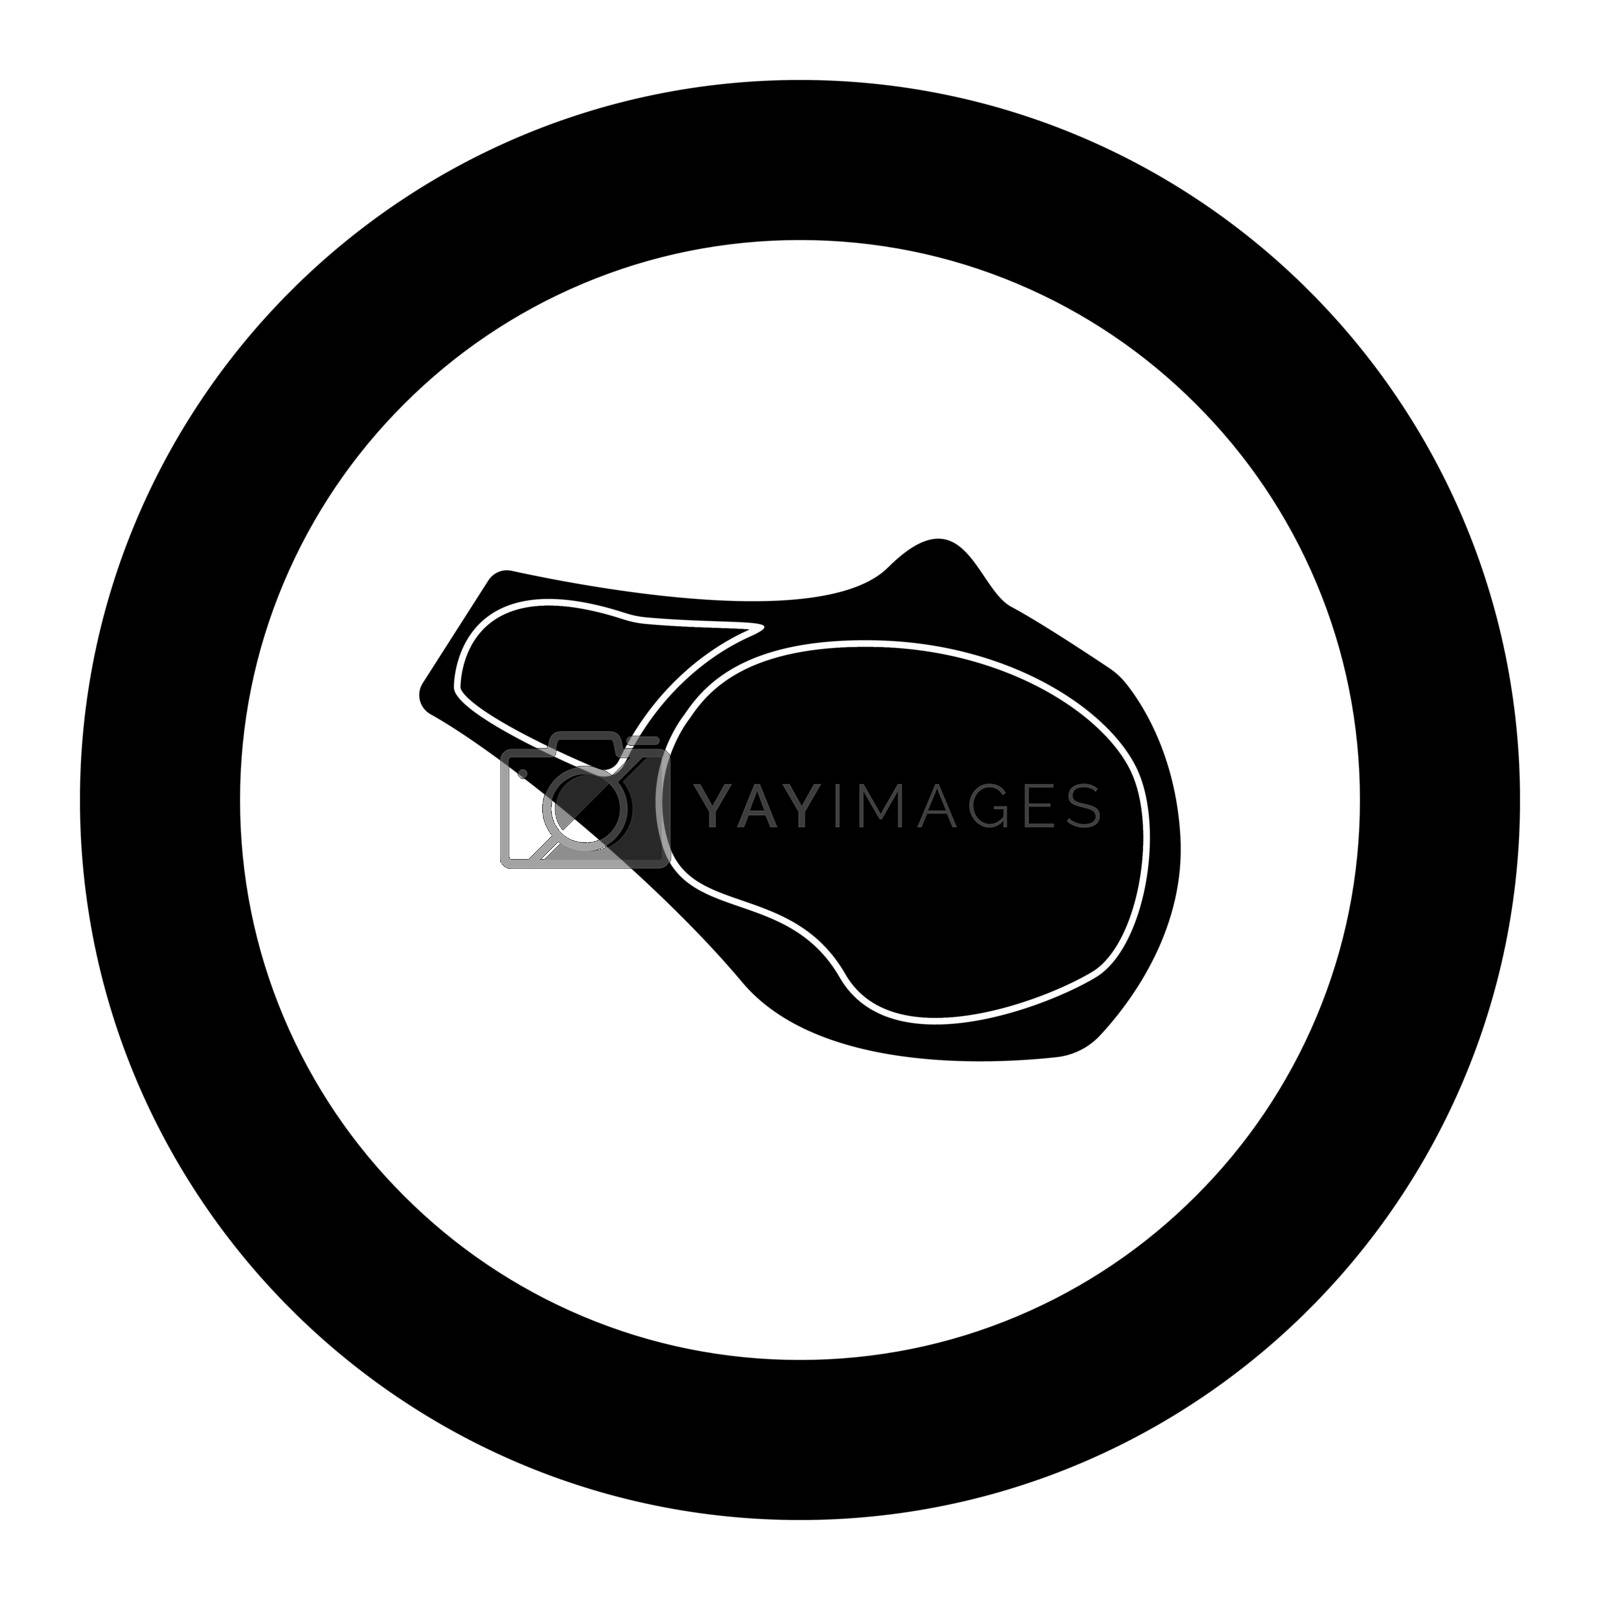 Royalty free image of Steak icon black color in circle by serhii435